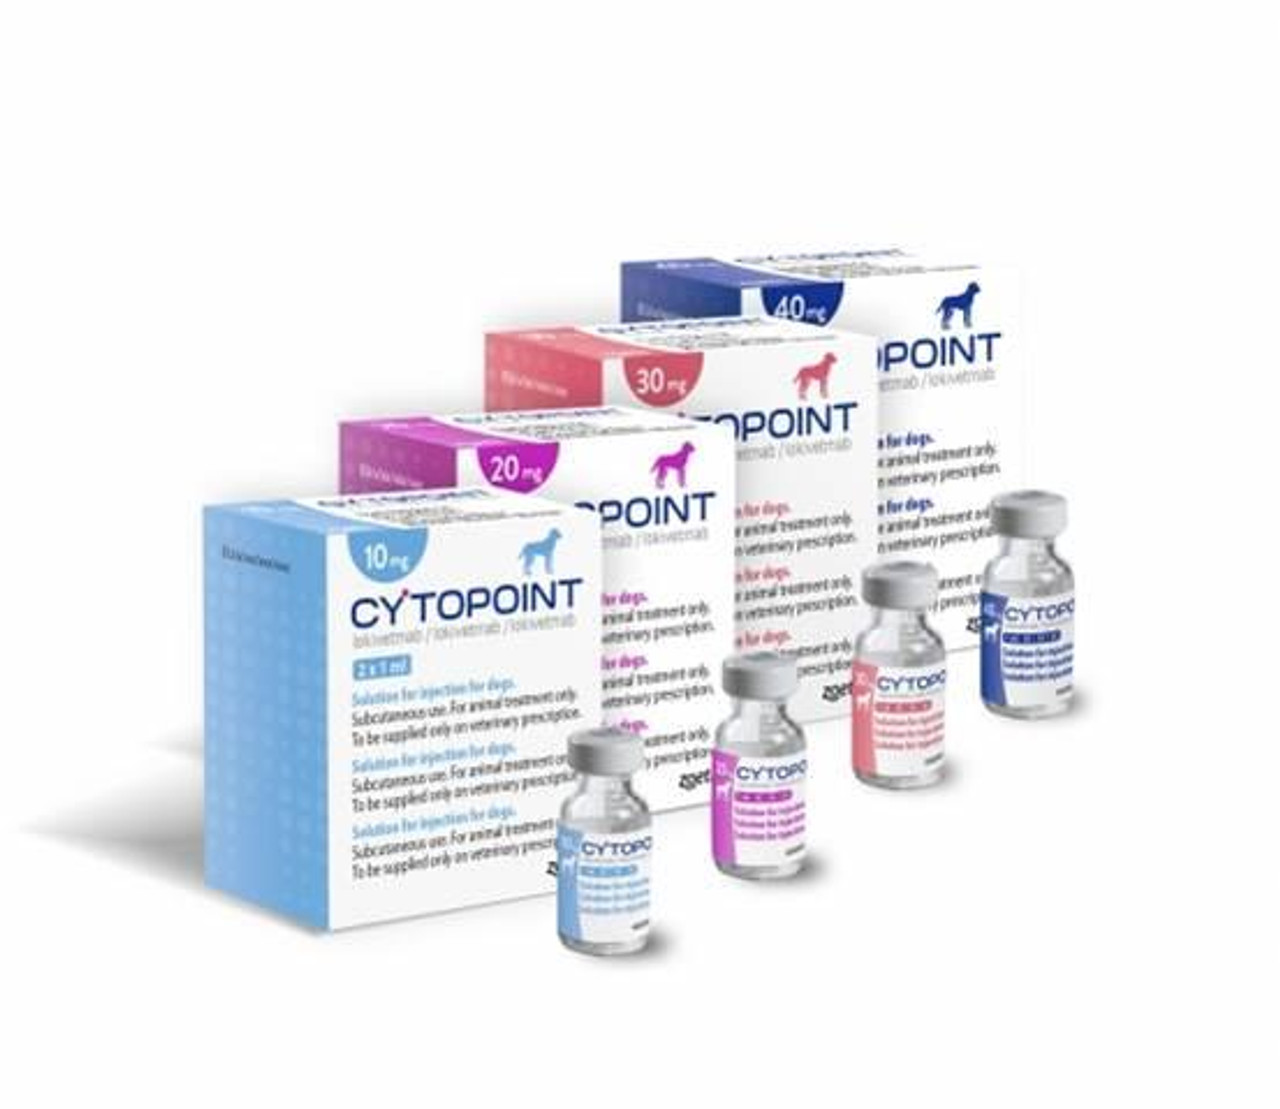 buy-cytopoint-40mg-injection-pet-care-pharmacy